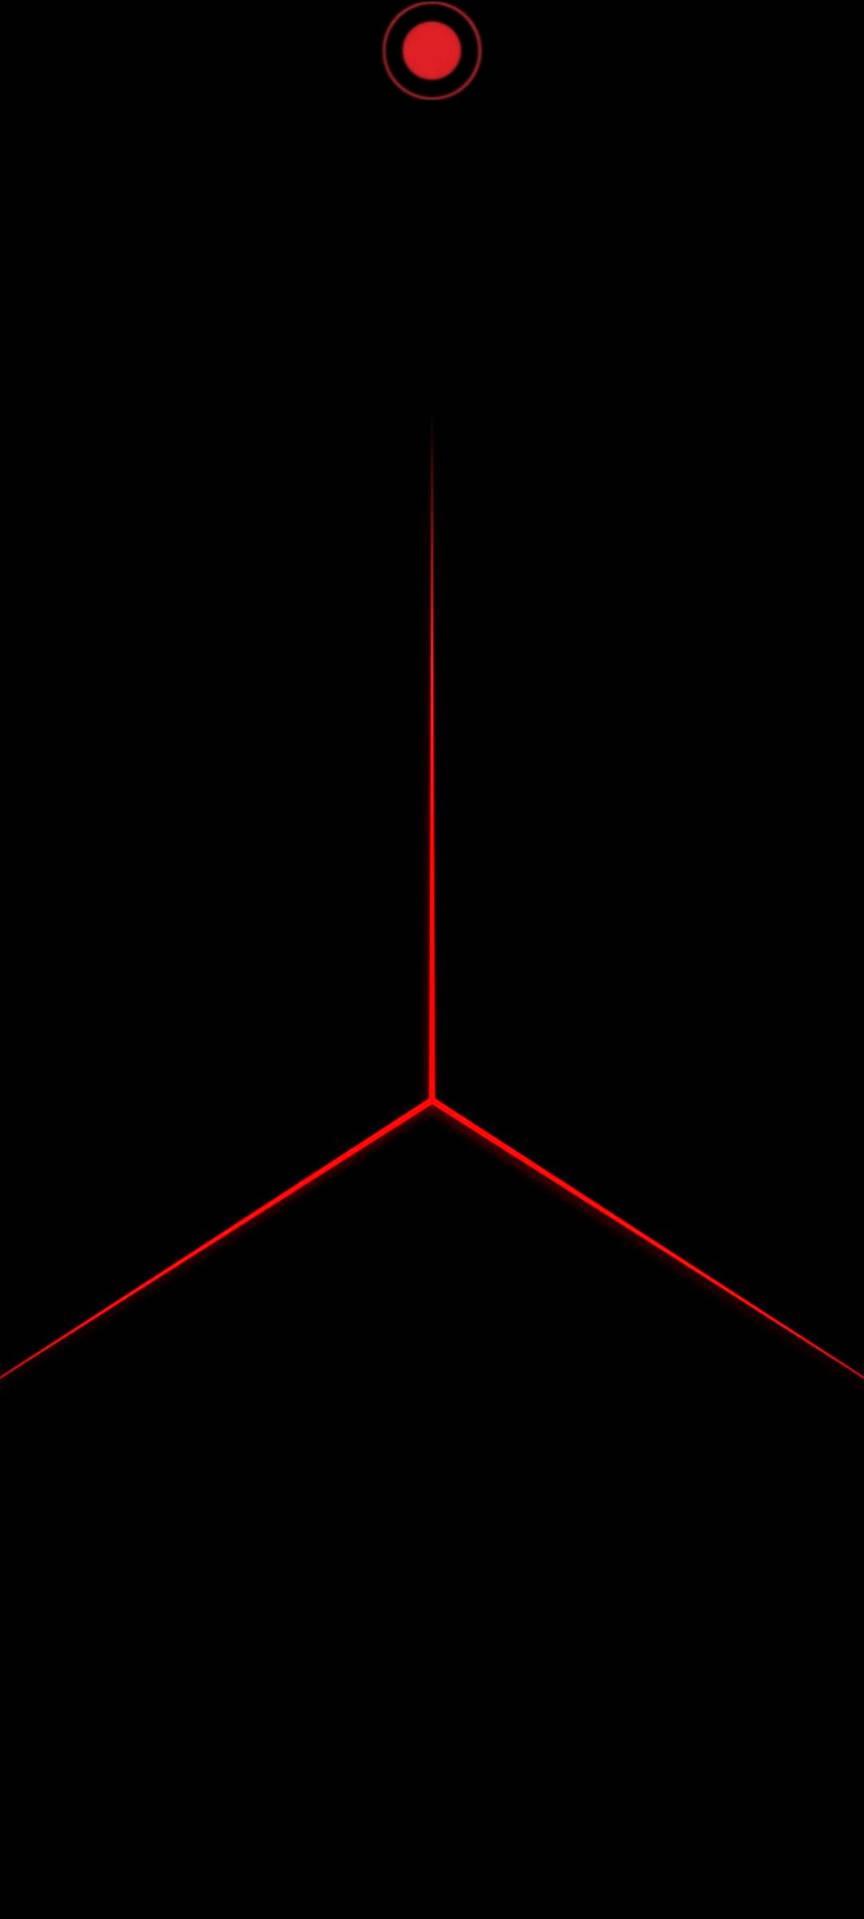 Download Dynamic Red Triangle Pattern for Redmi Note Punch Hole